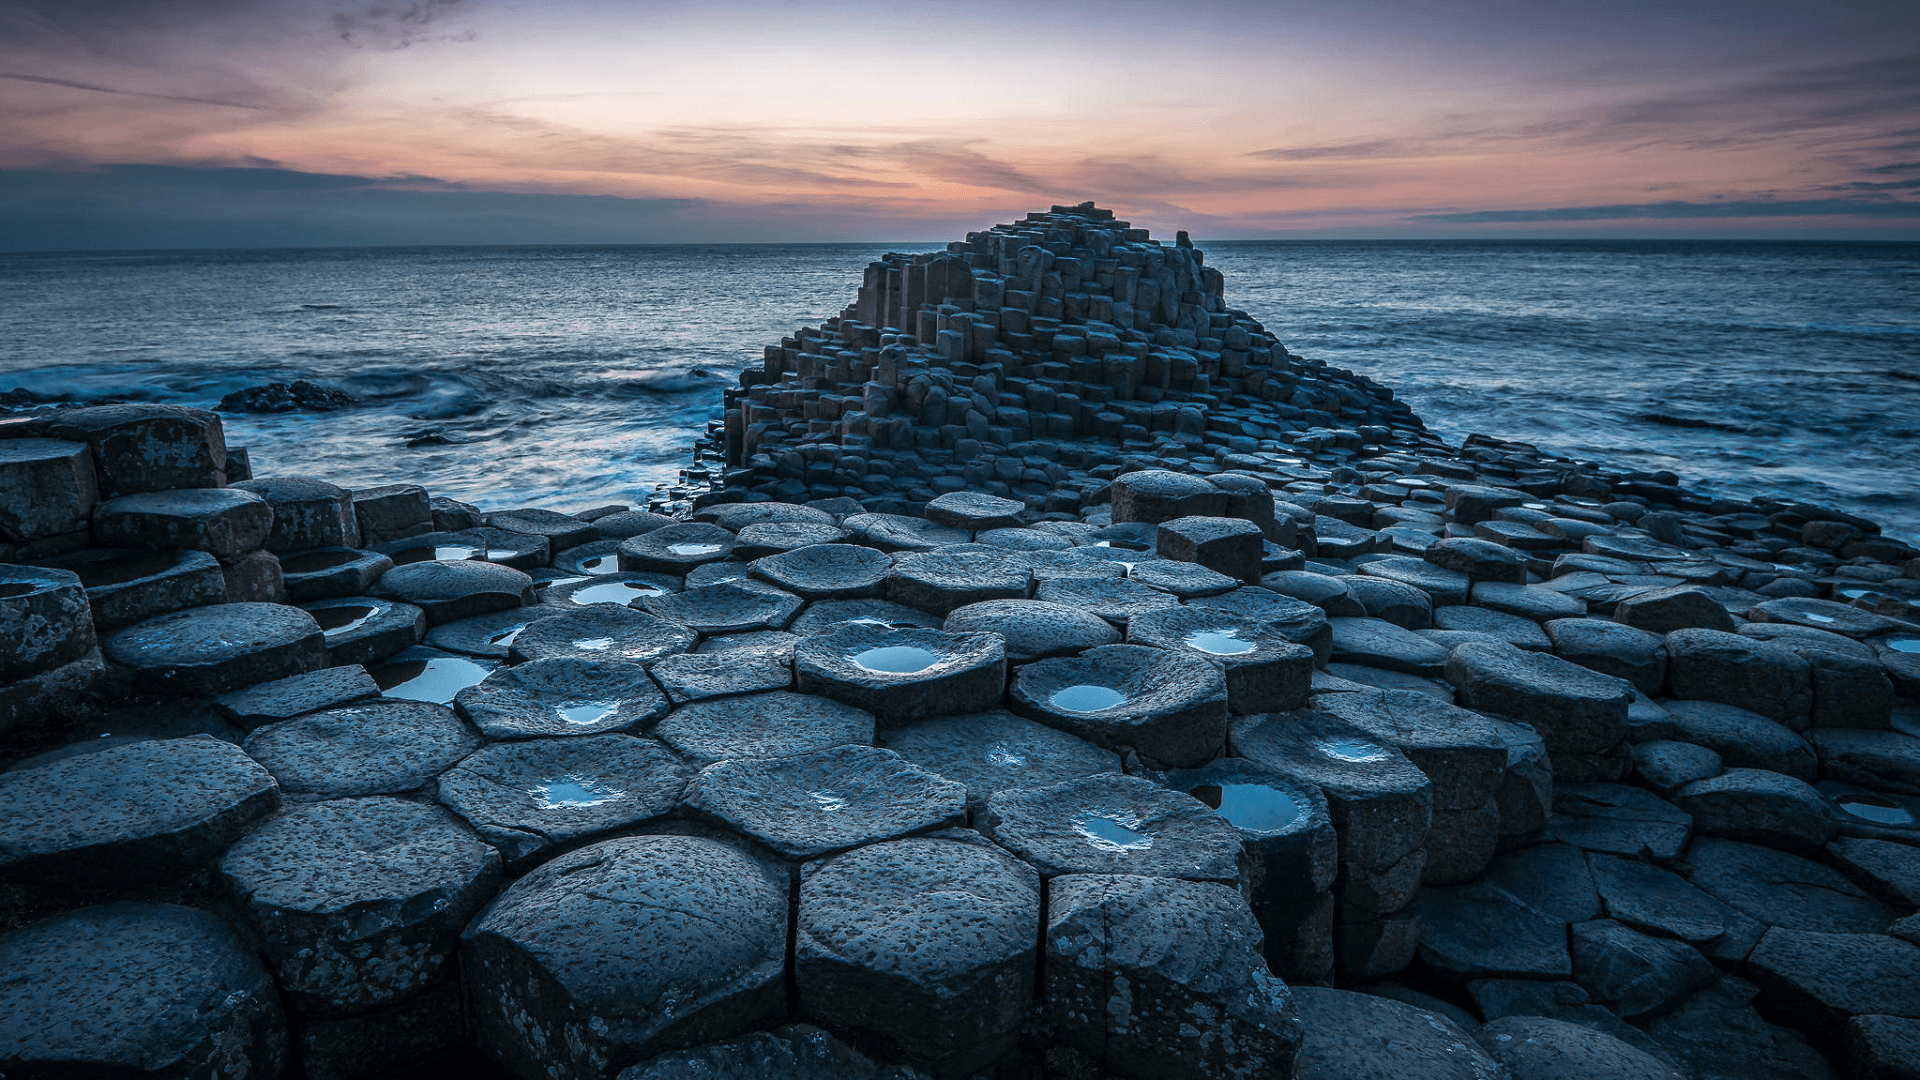 The Giant's Causeway area of about 000 interlocking basalt